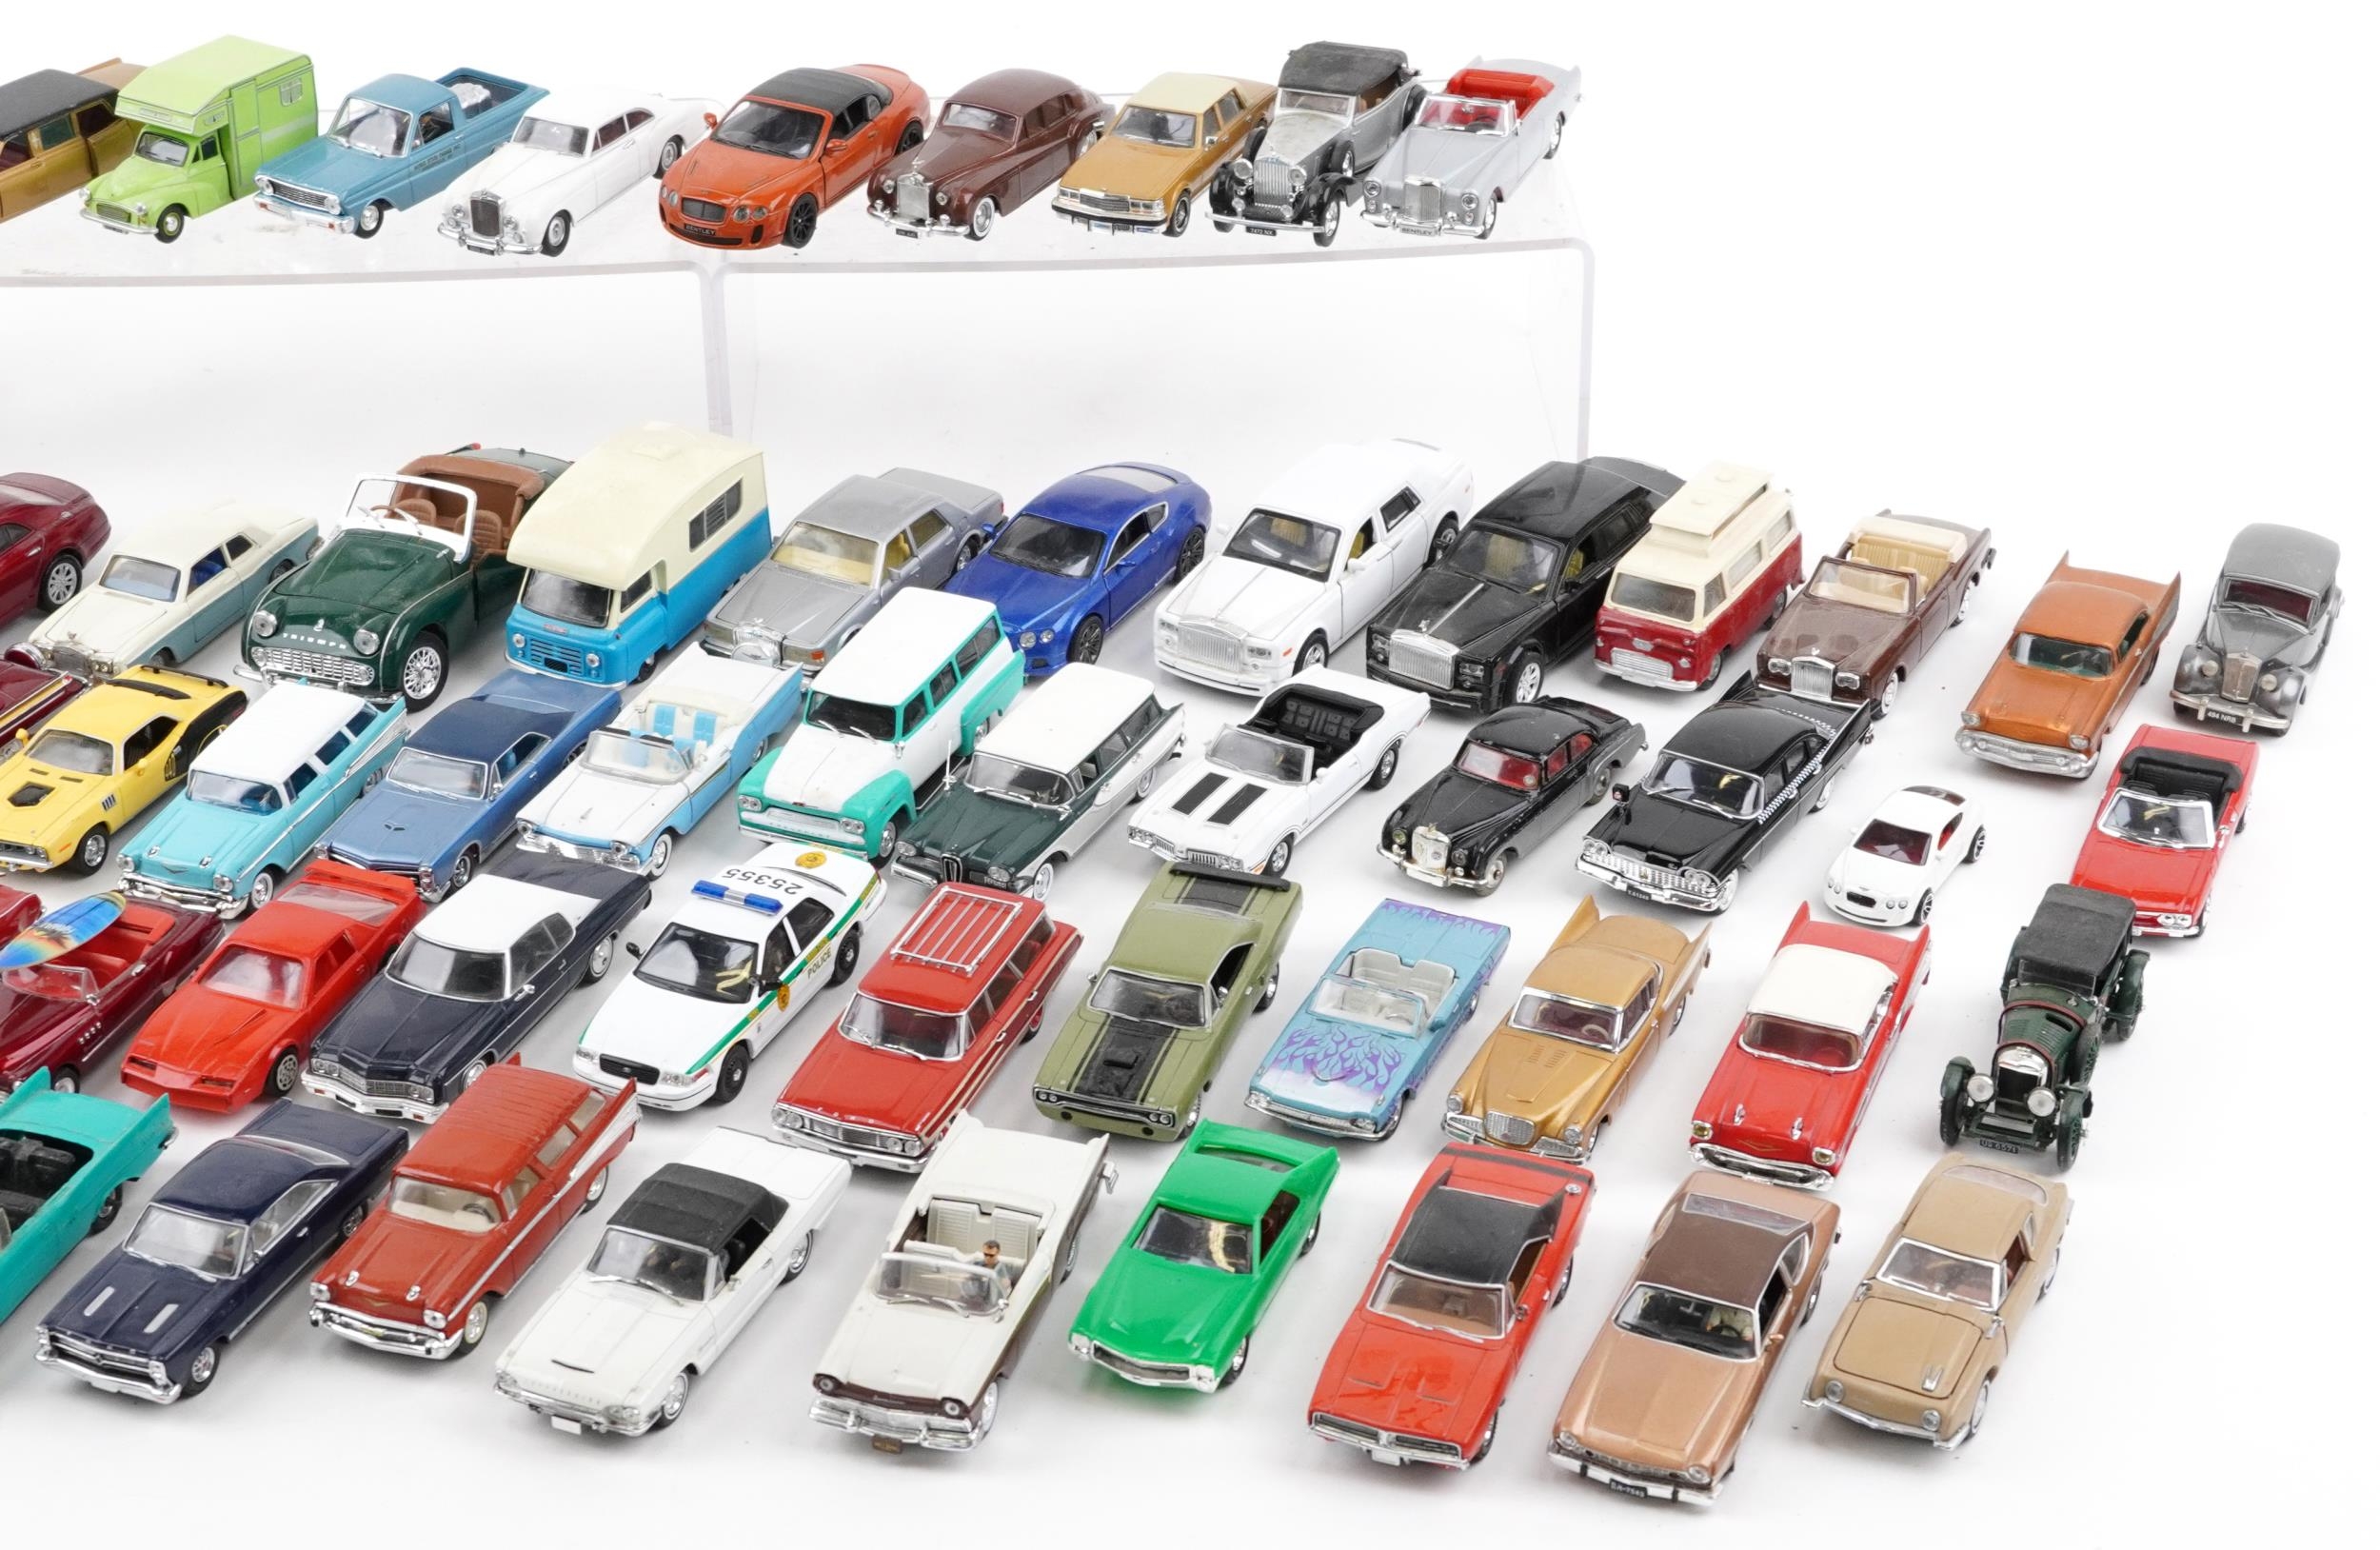 Large collection of vintage and later diecast vehicles including Corgi, Matchbox, Solido and Del - Image 3 of 3